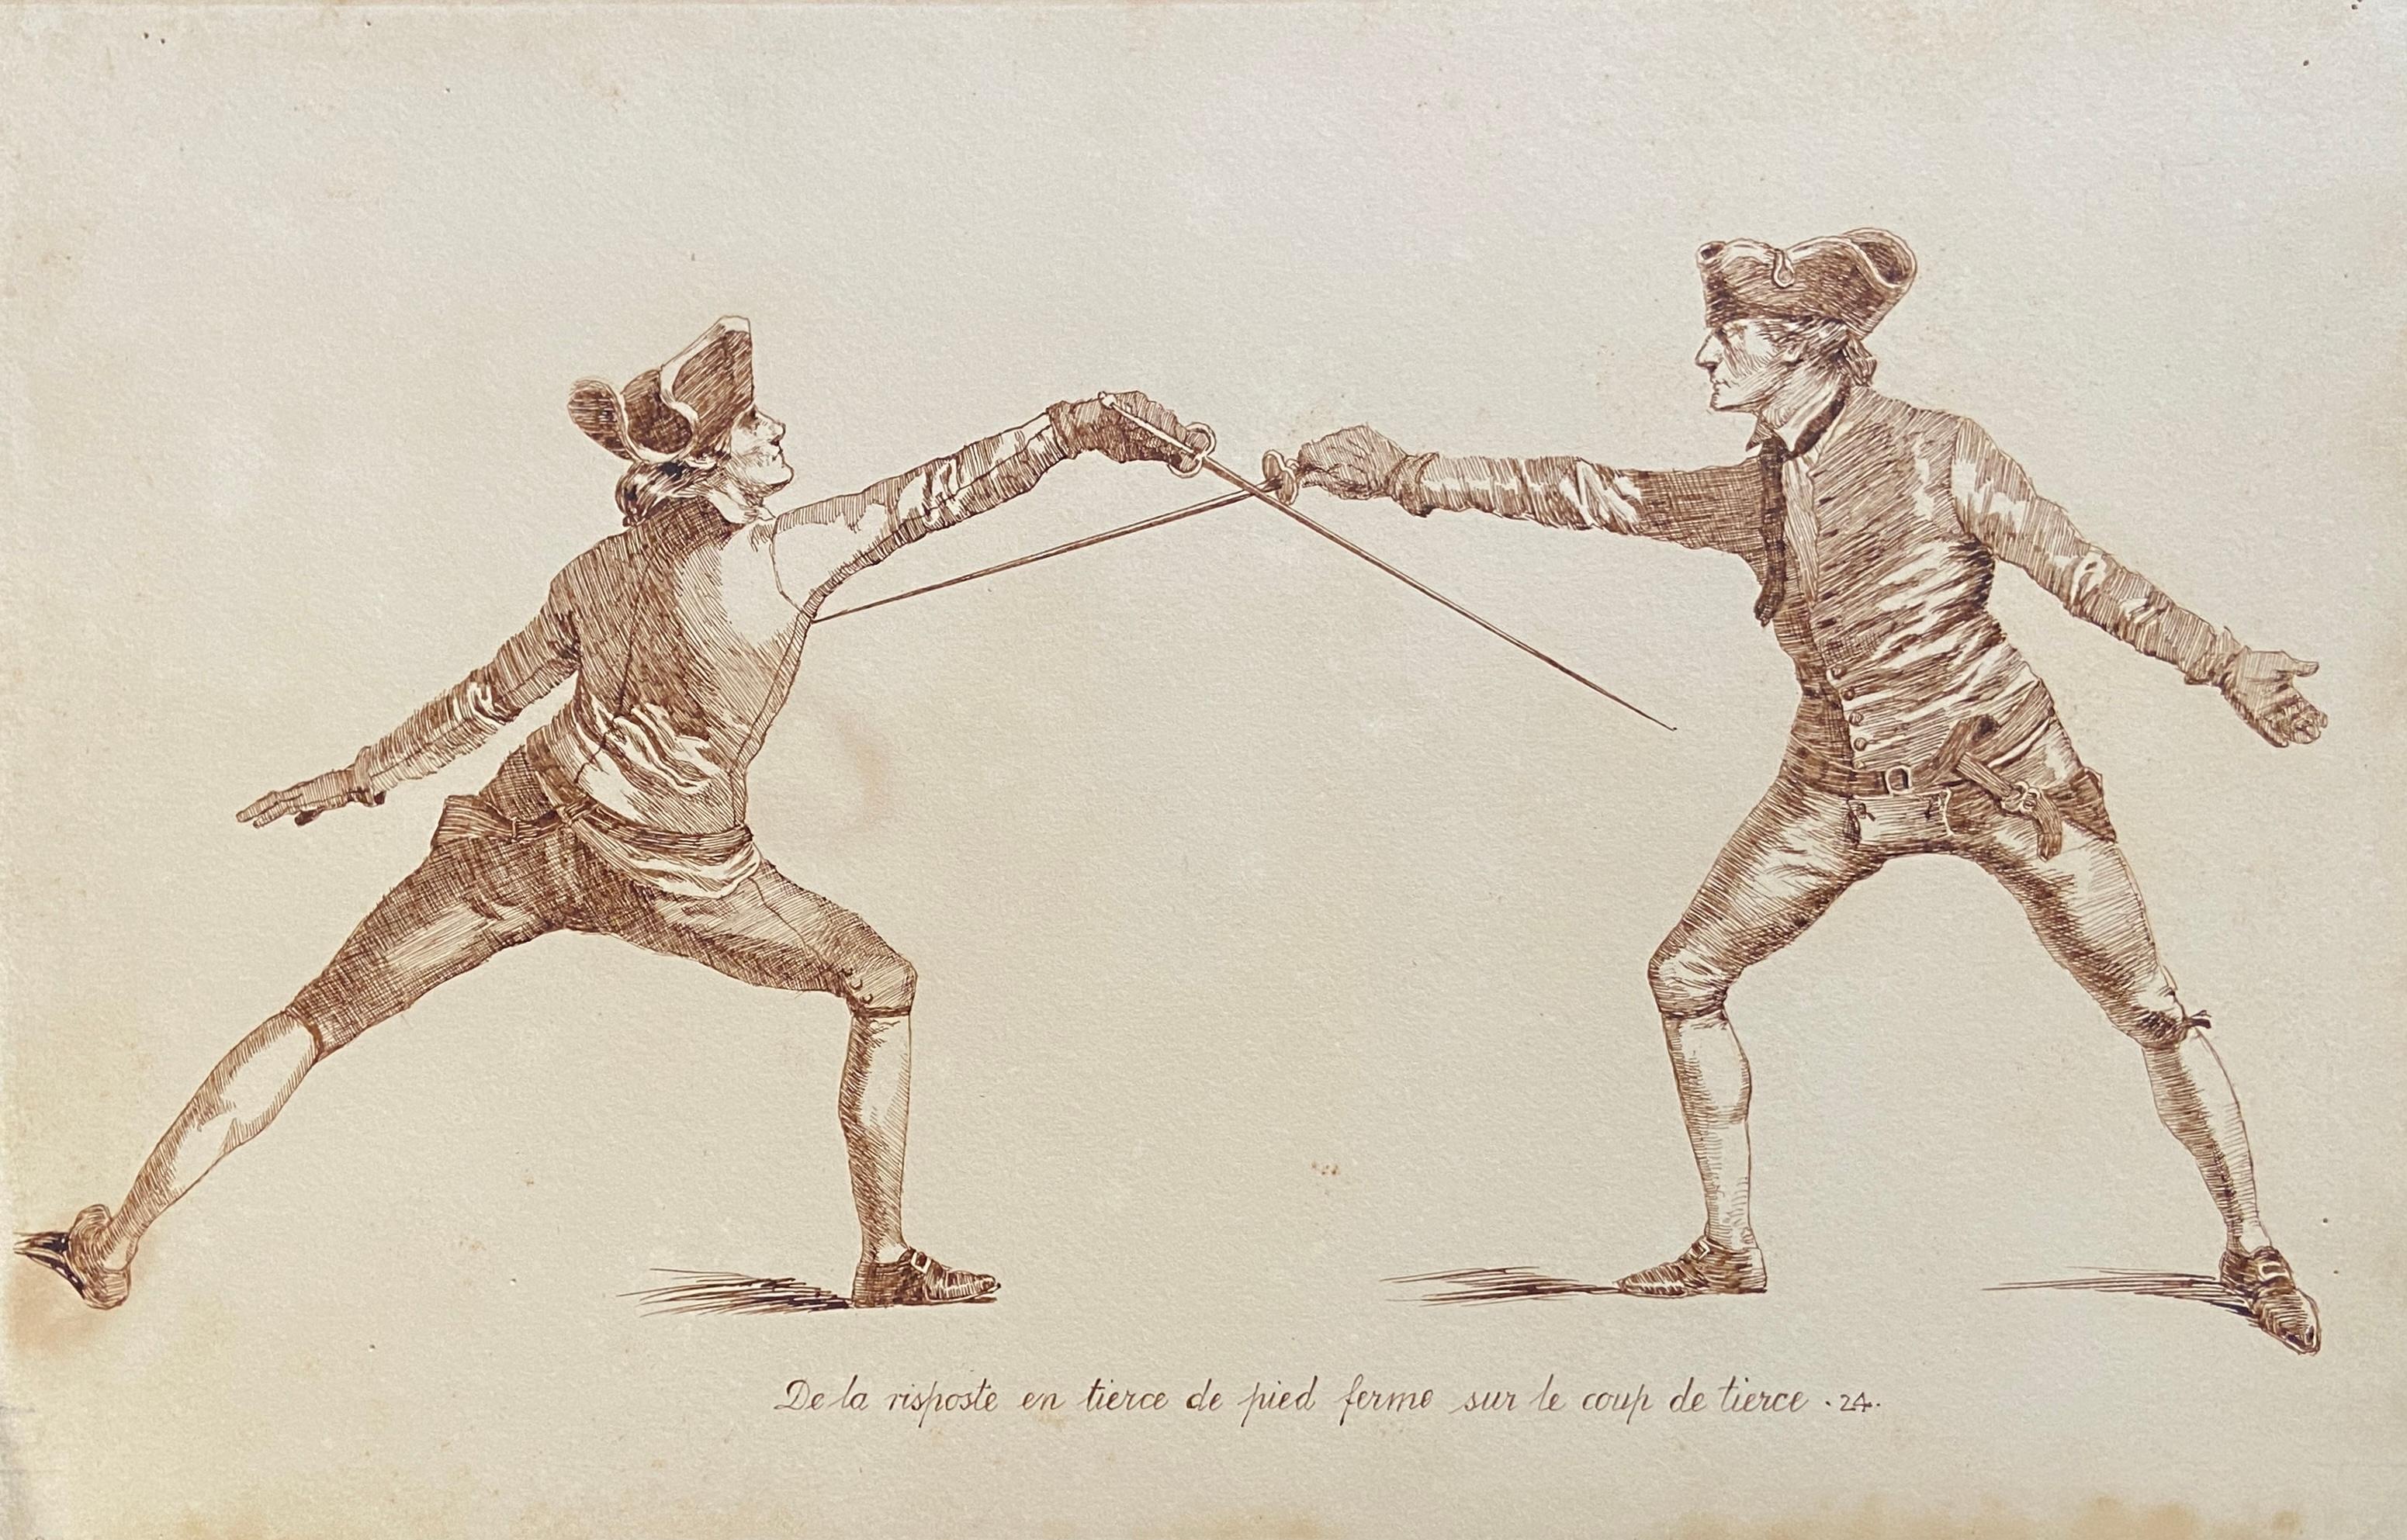 The School of Arms, Pen and Ink Fencing Drawings, c.1920s French - French School Art by 20th Century French School